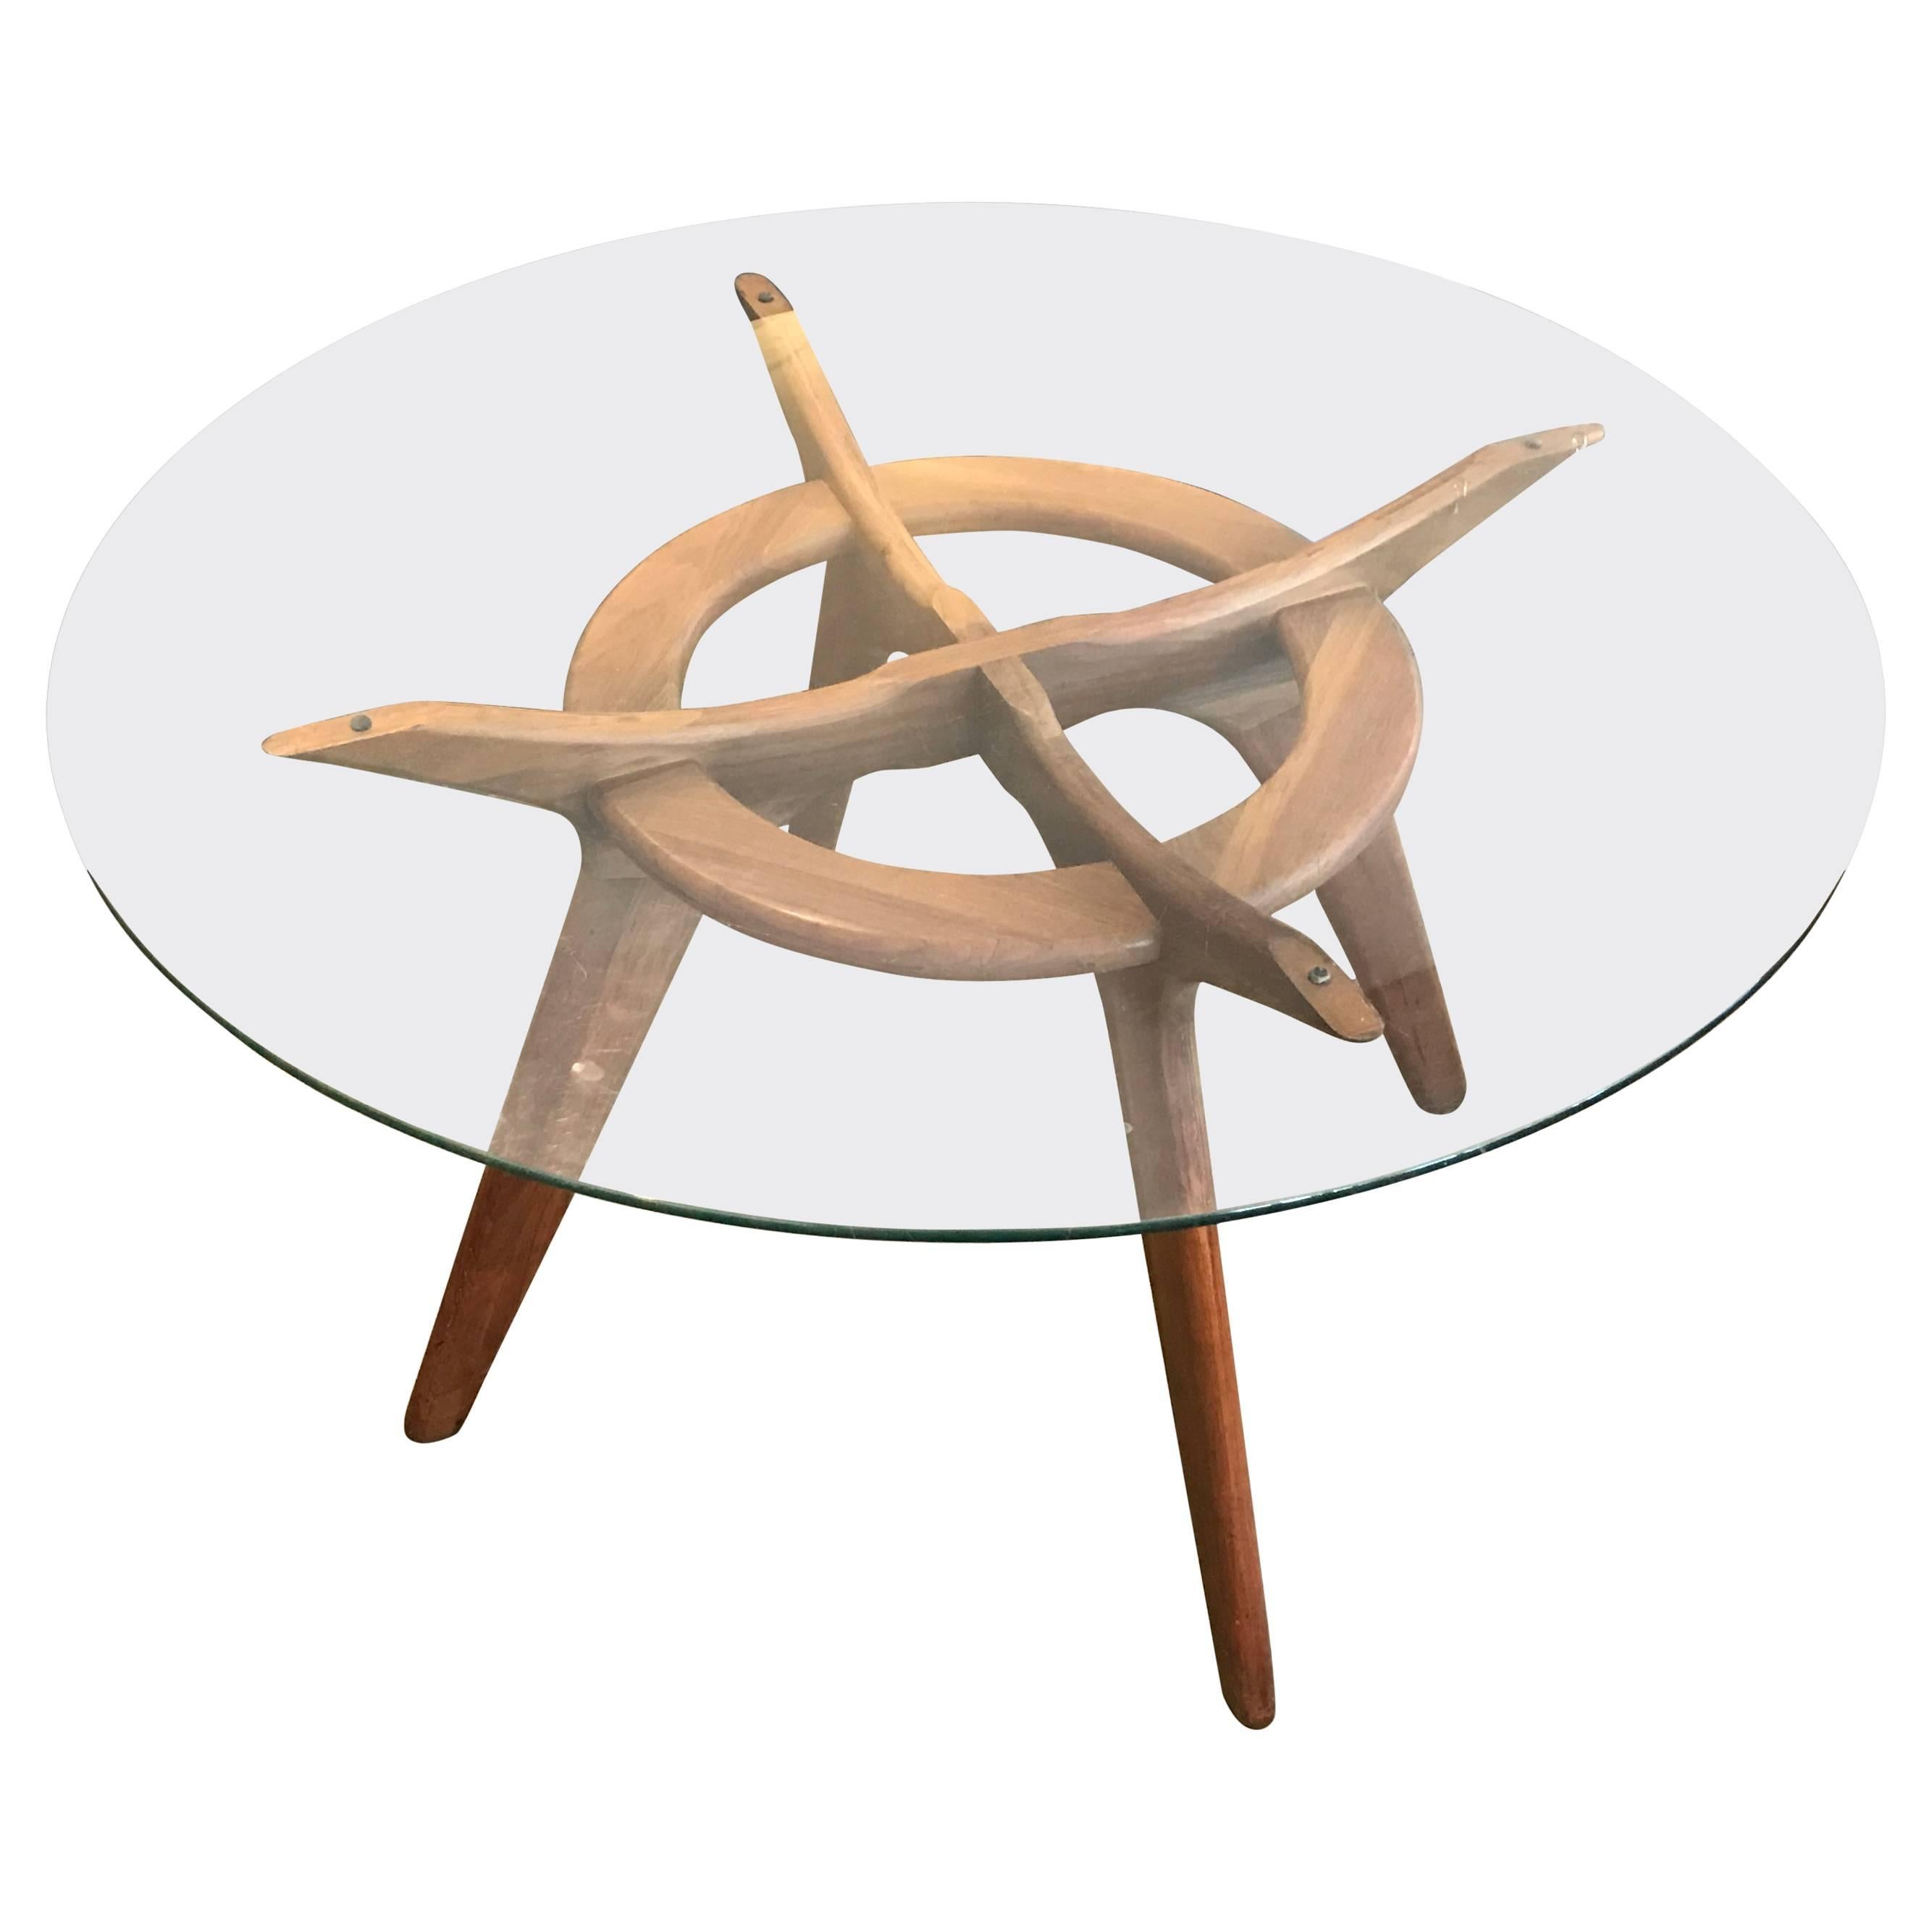 Adrian Pearsall Walnut and Glass "Compass" Dining Table